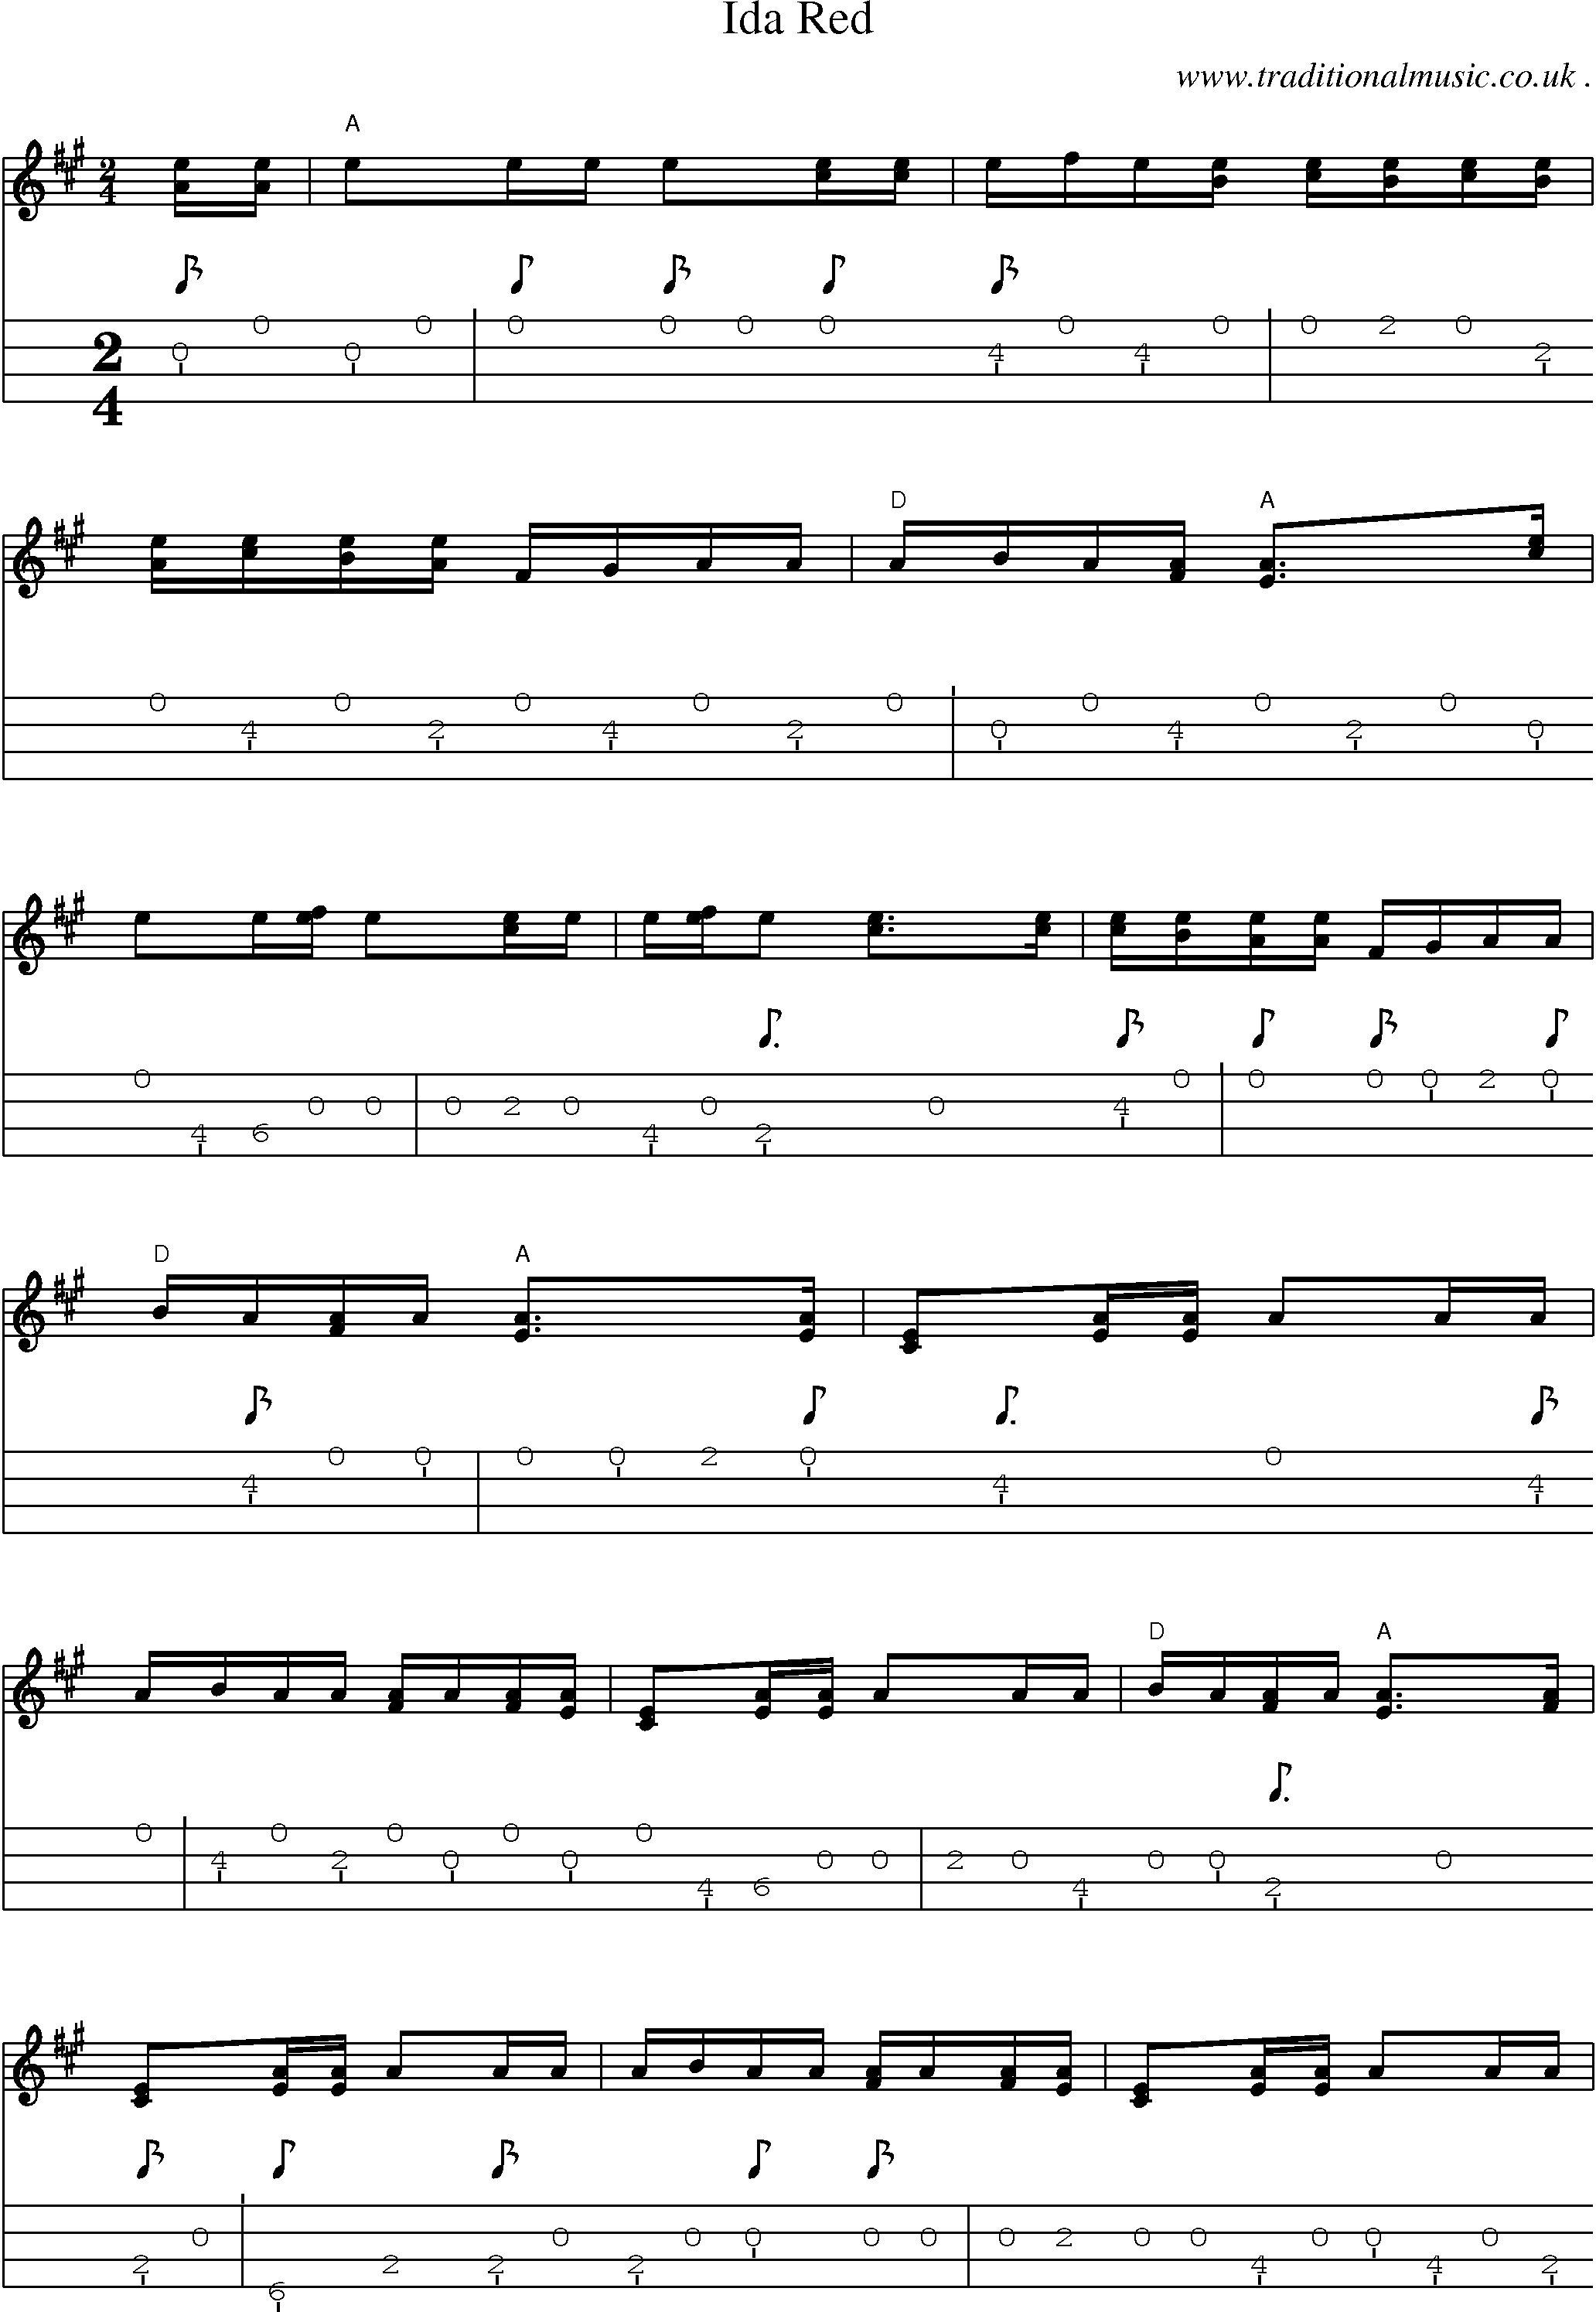 Music Score and Guitar Tabs for Ida Red